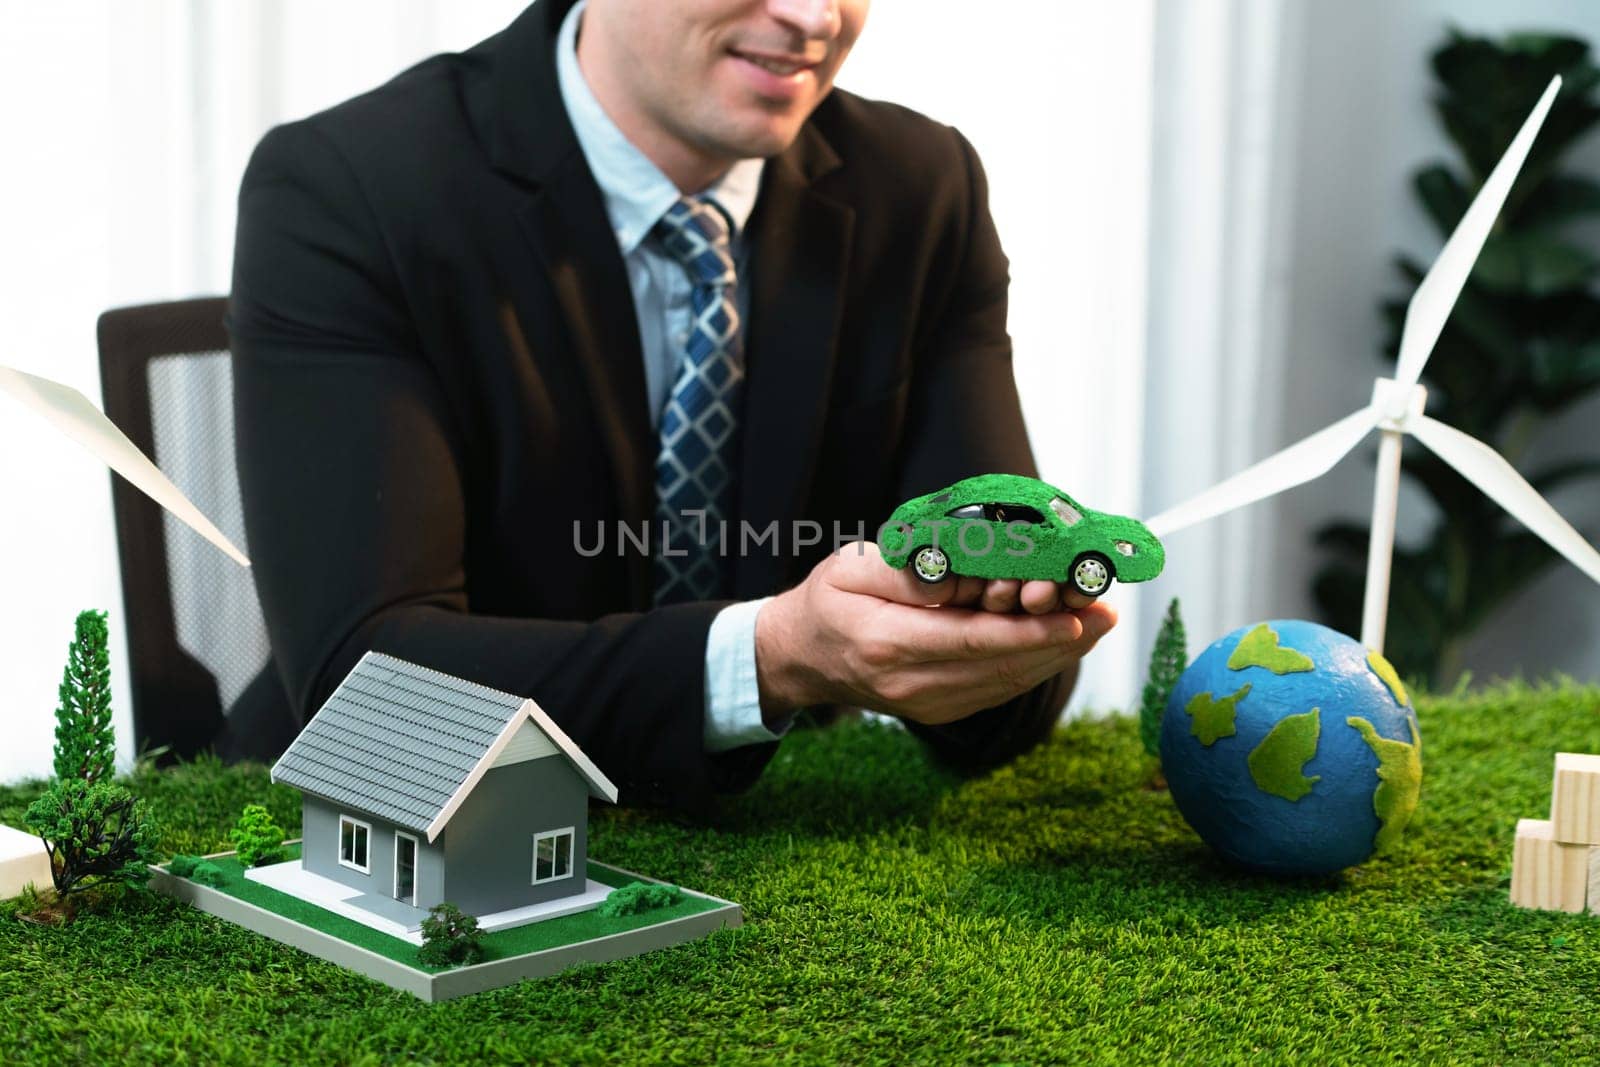 Businessman or CEO holding paper globe in office. Quaint by biancoblue